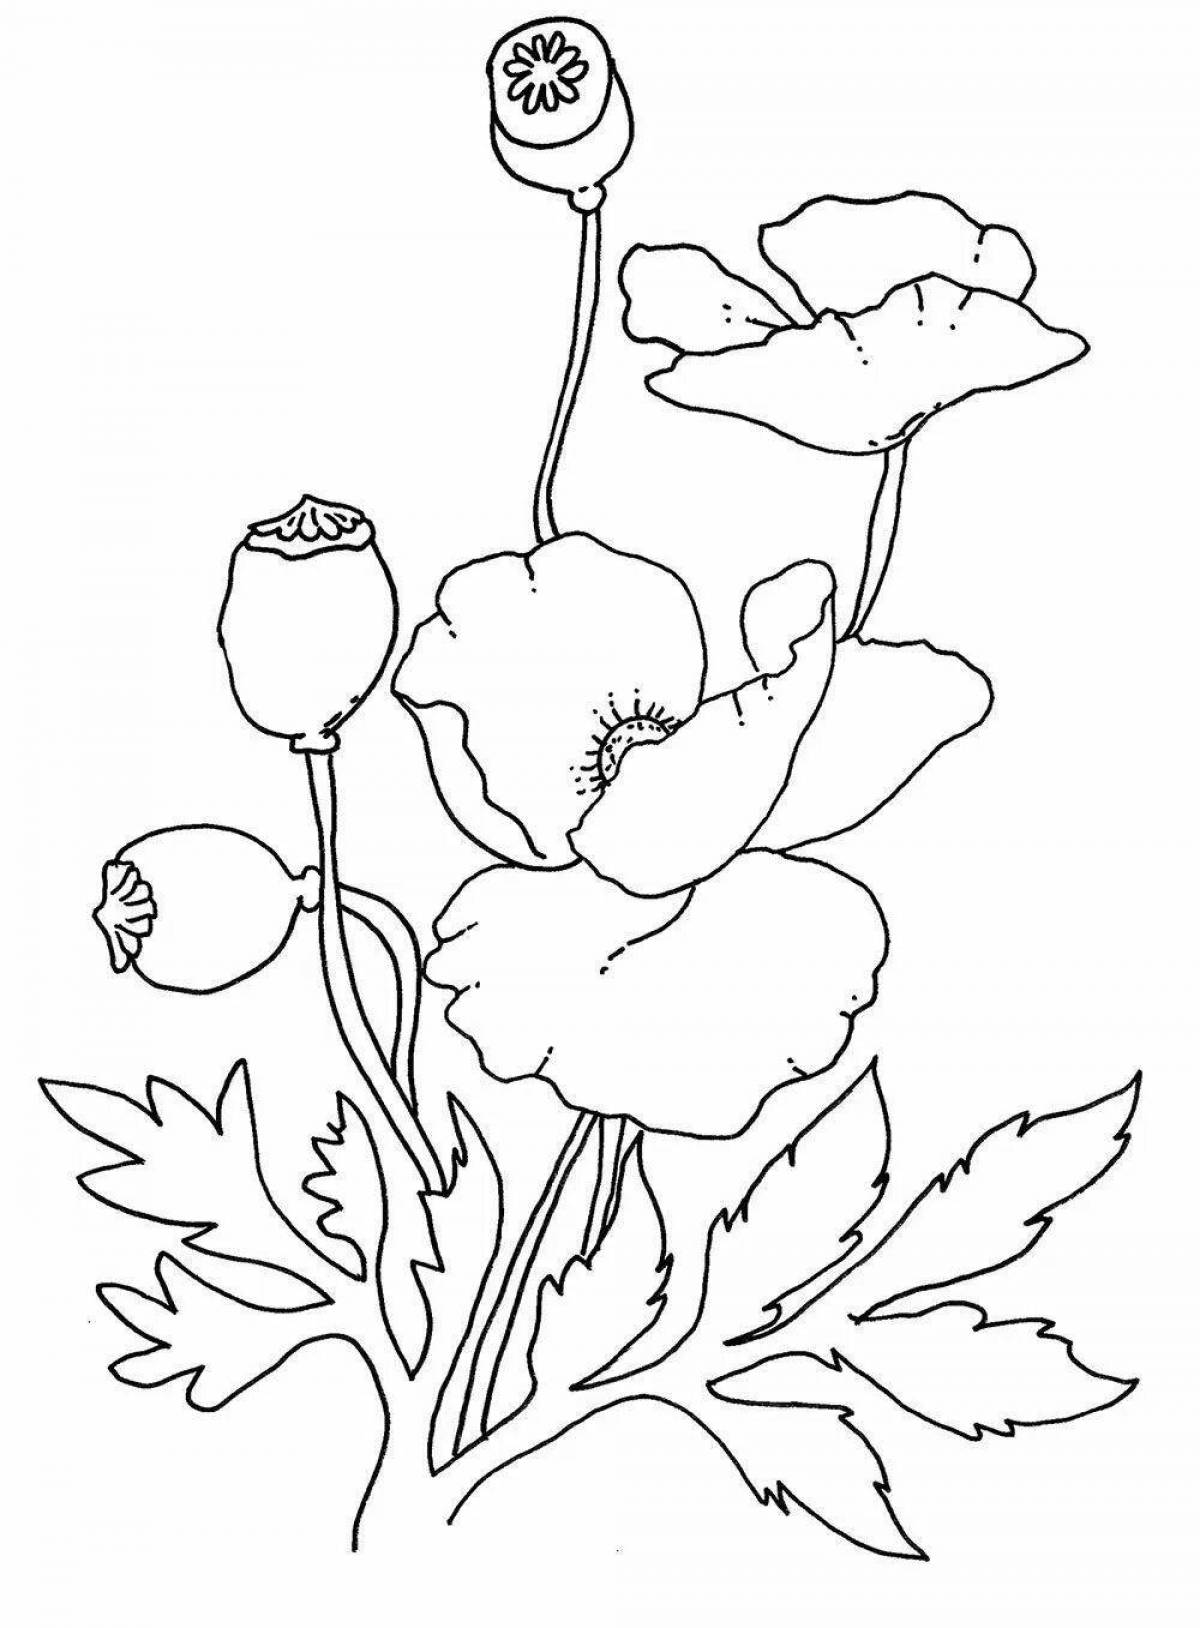 Adorable lazoric flower coloring page